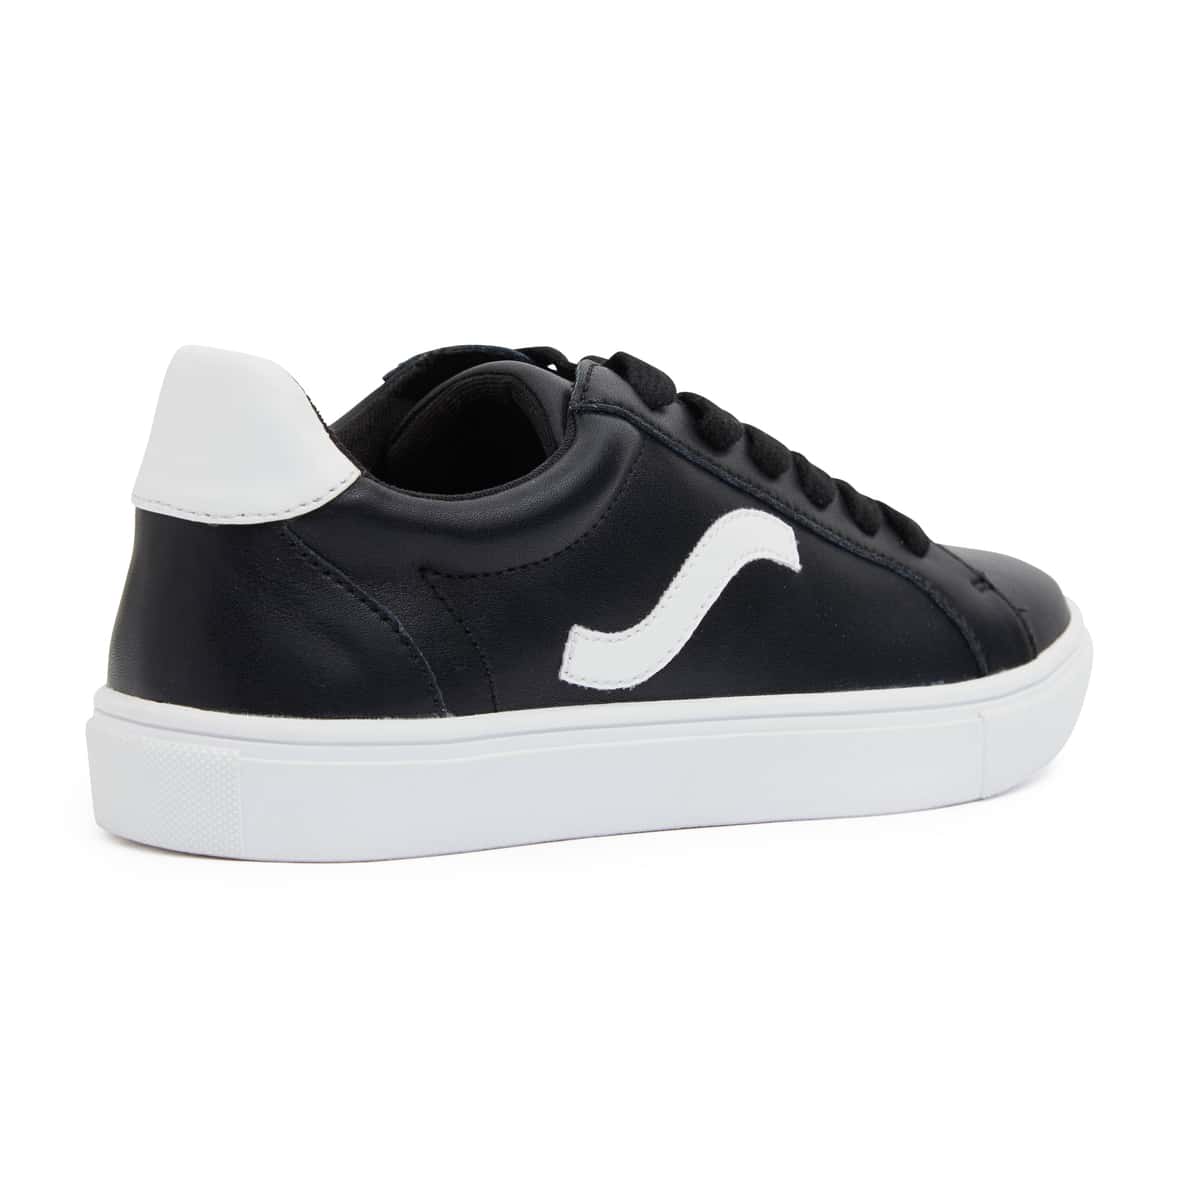 Saxon Sneaker in Black And White Leather